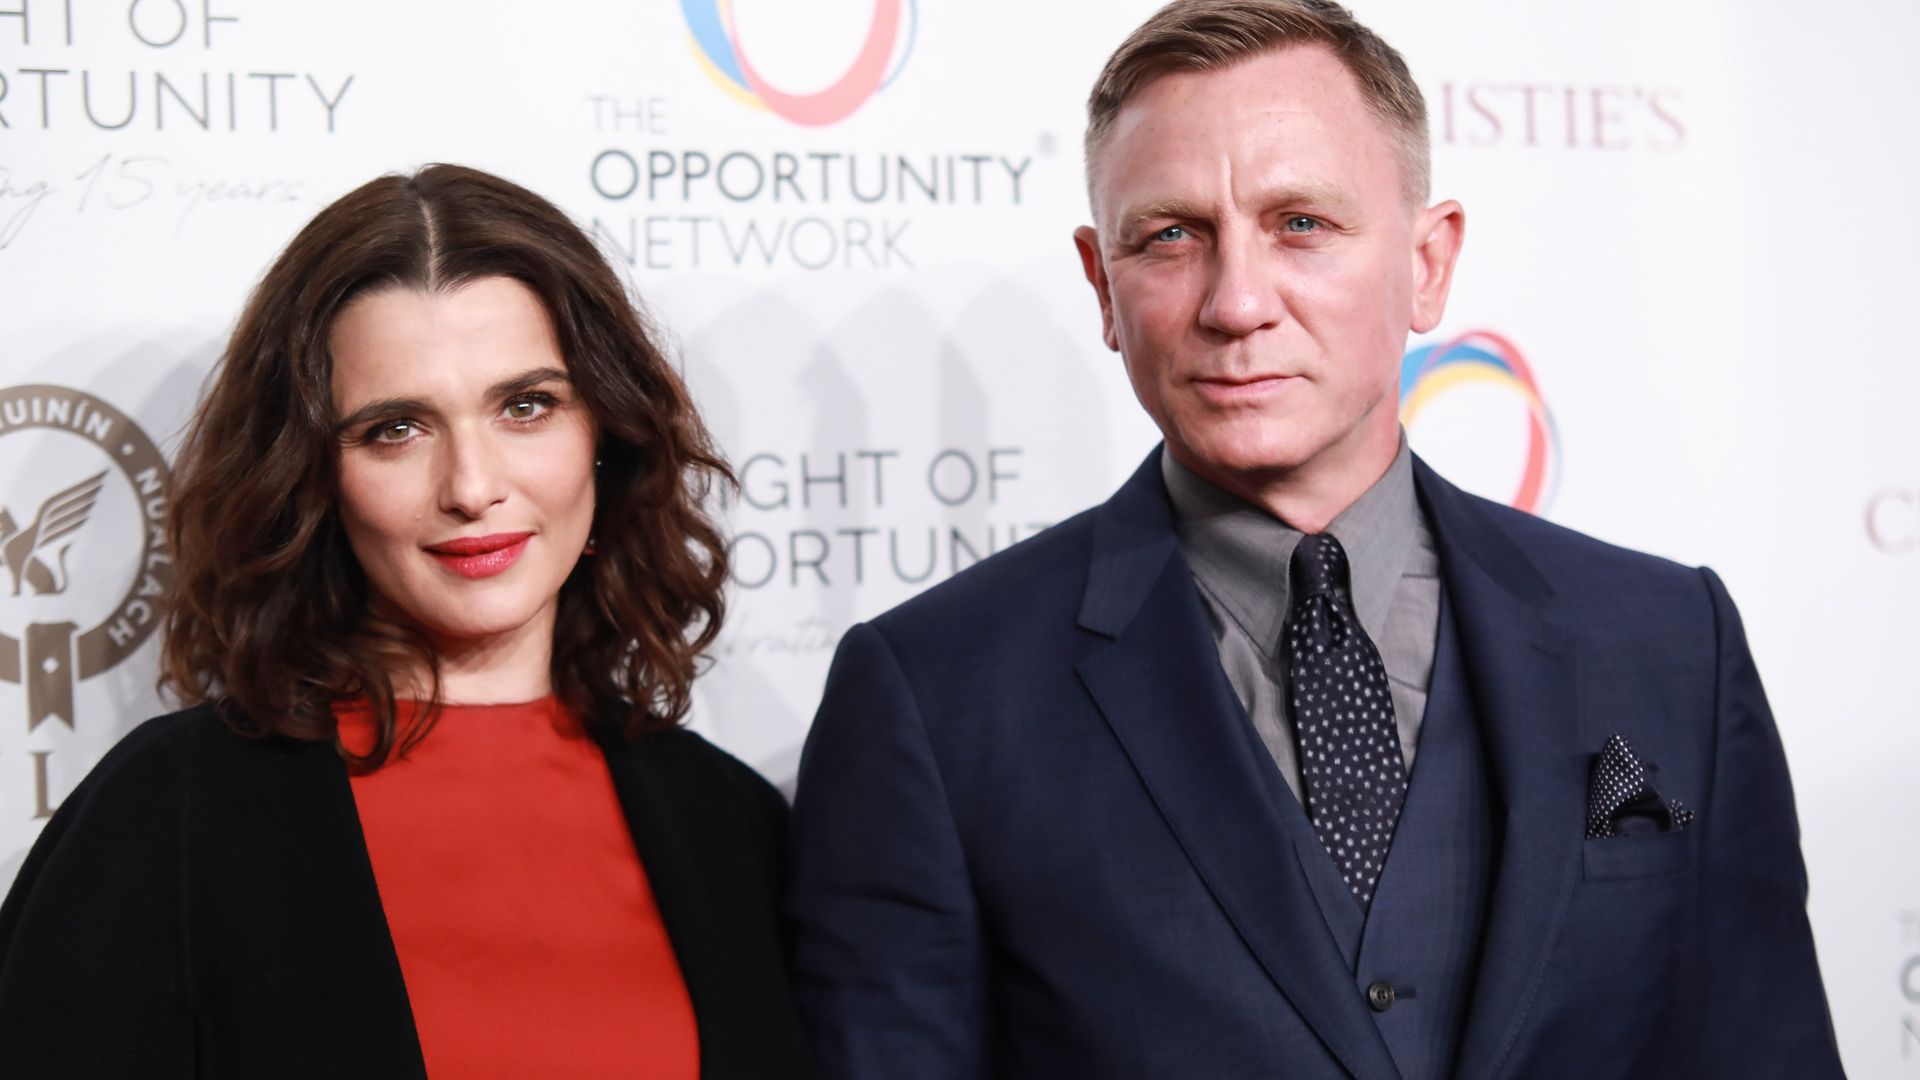 Rachel Weisz and Daniel Craig at The Opportunity Network event in 2018